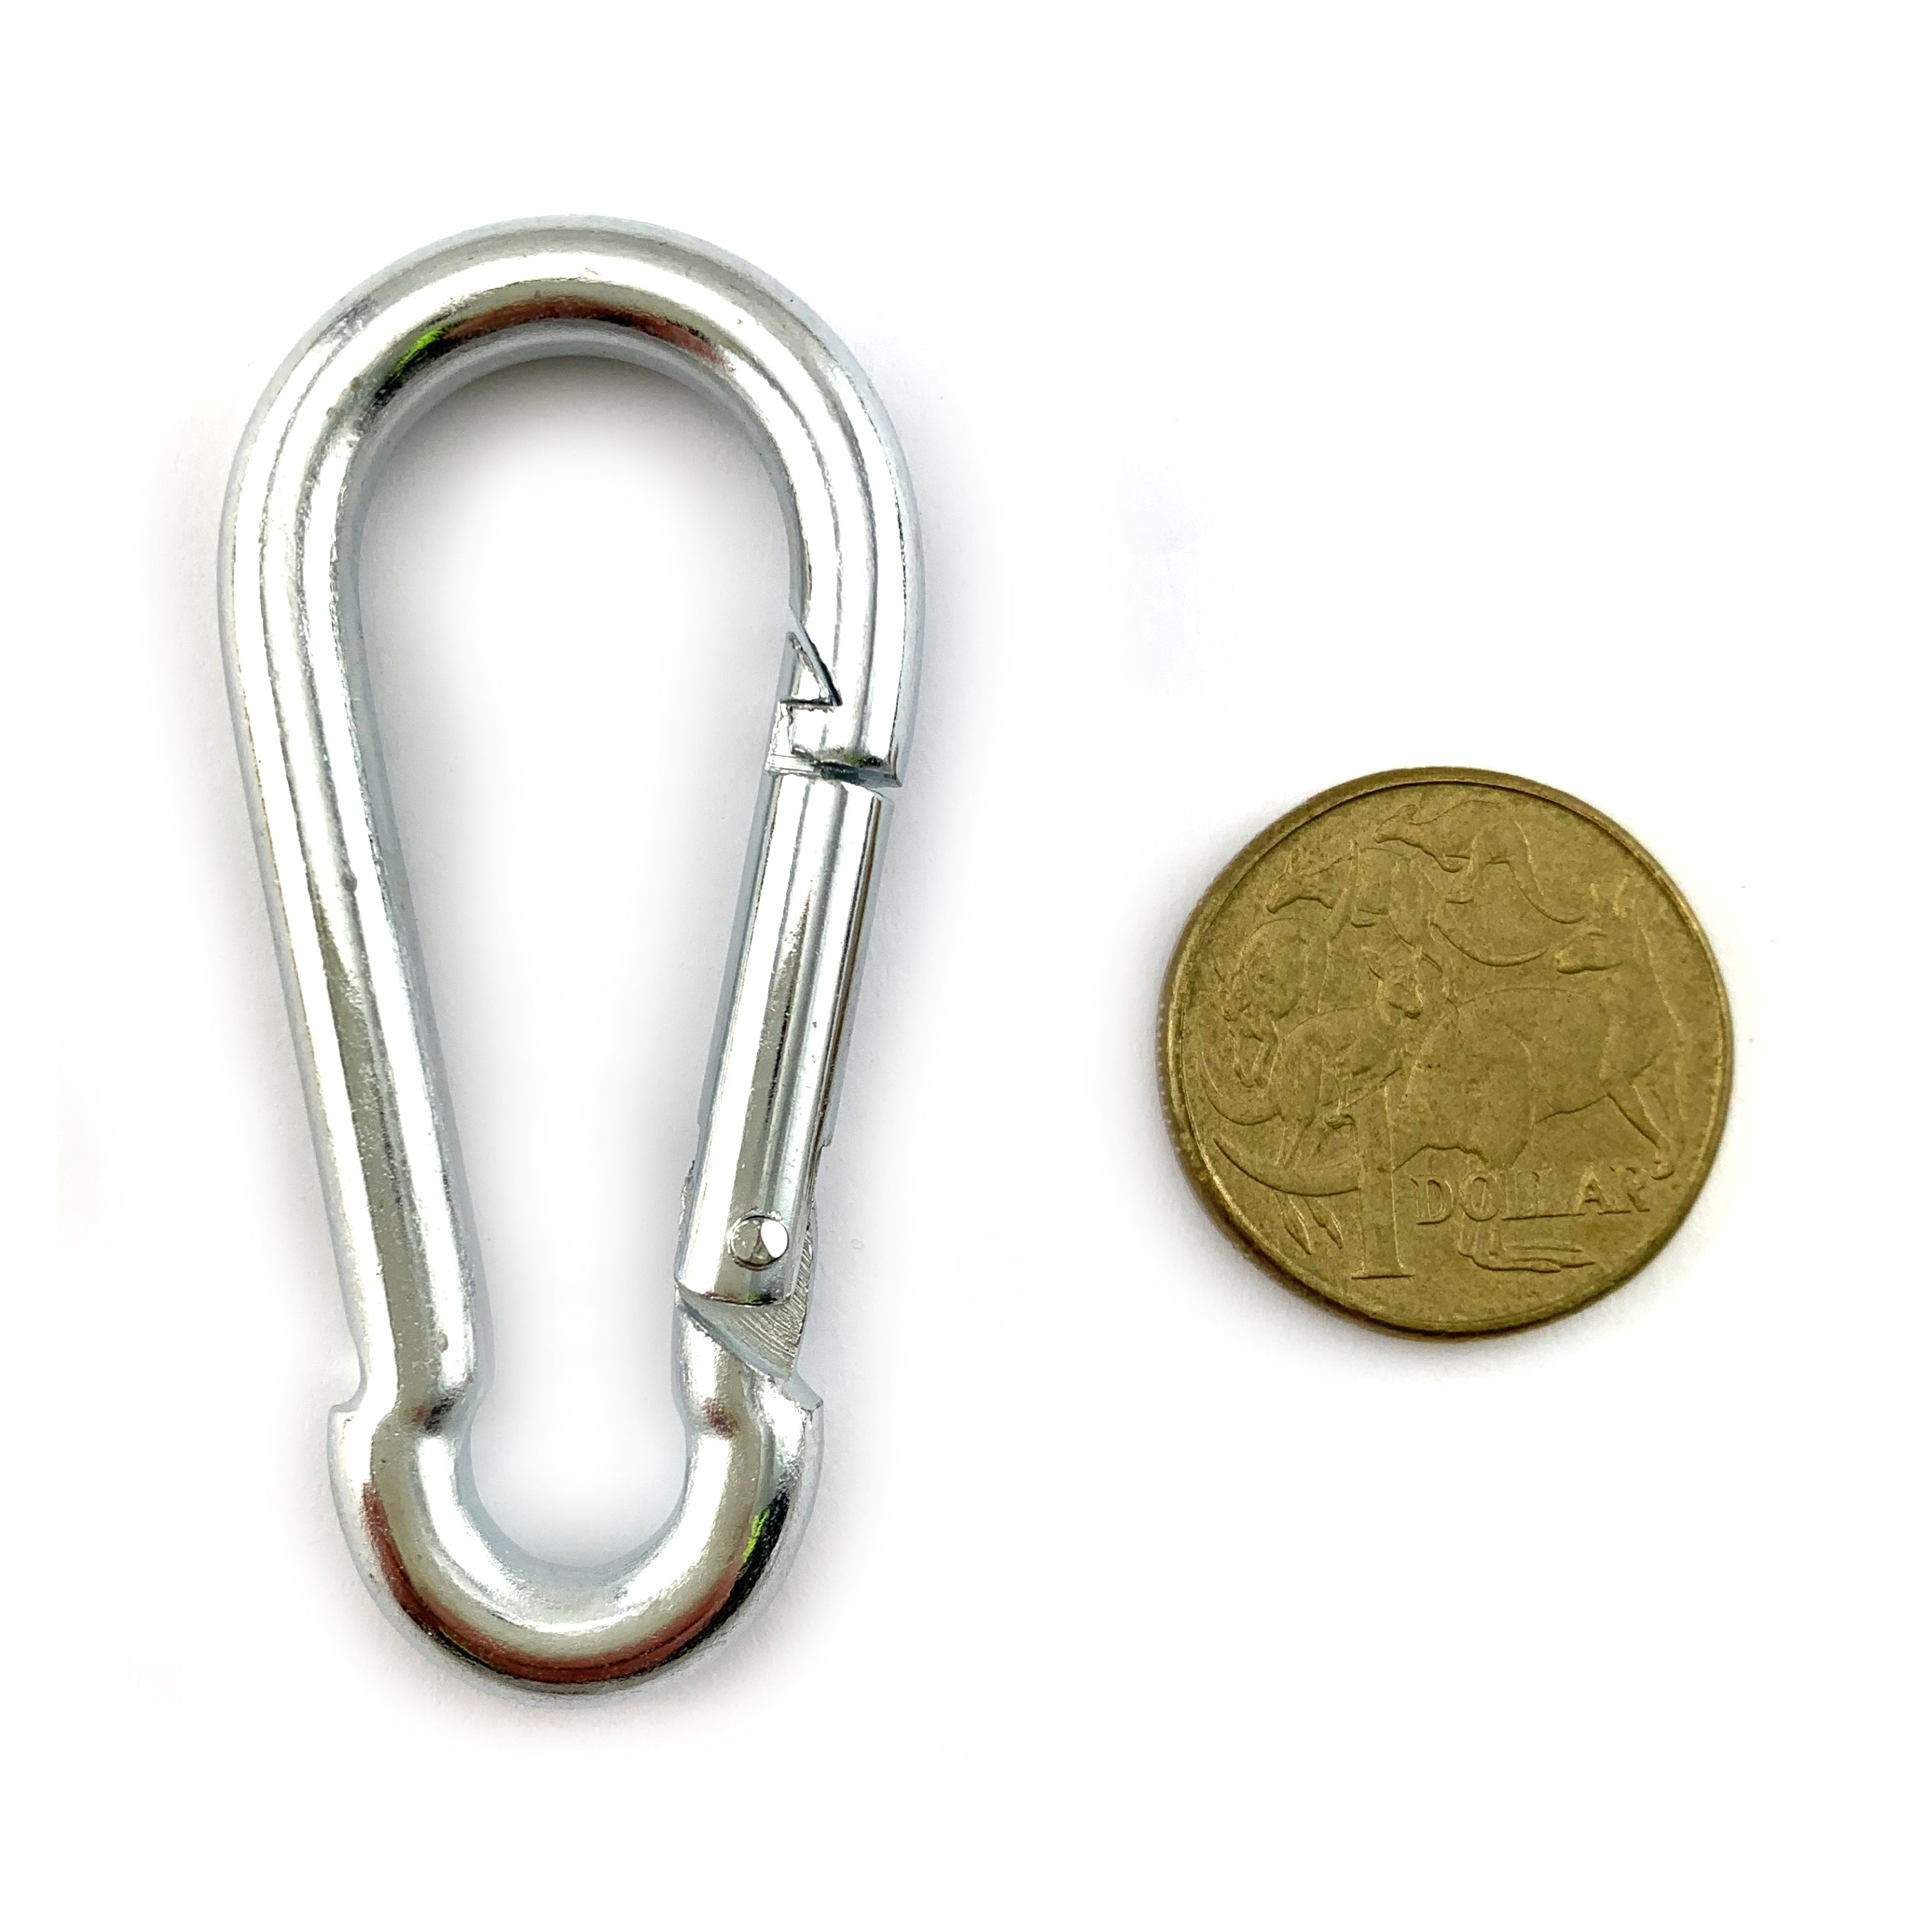 Snap Hook in Zinc Plated Steel, Size 6mm. Australia wide delivery